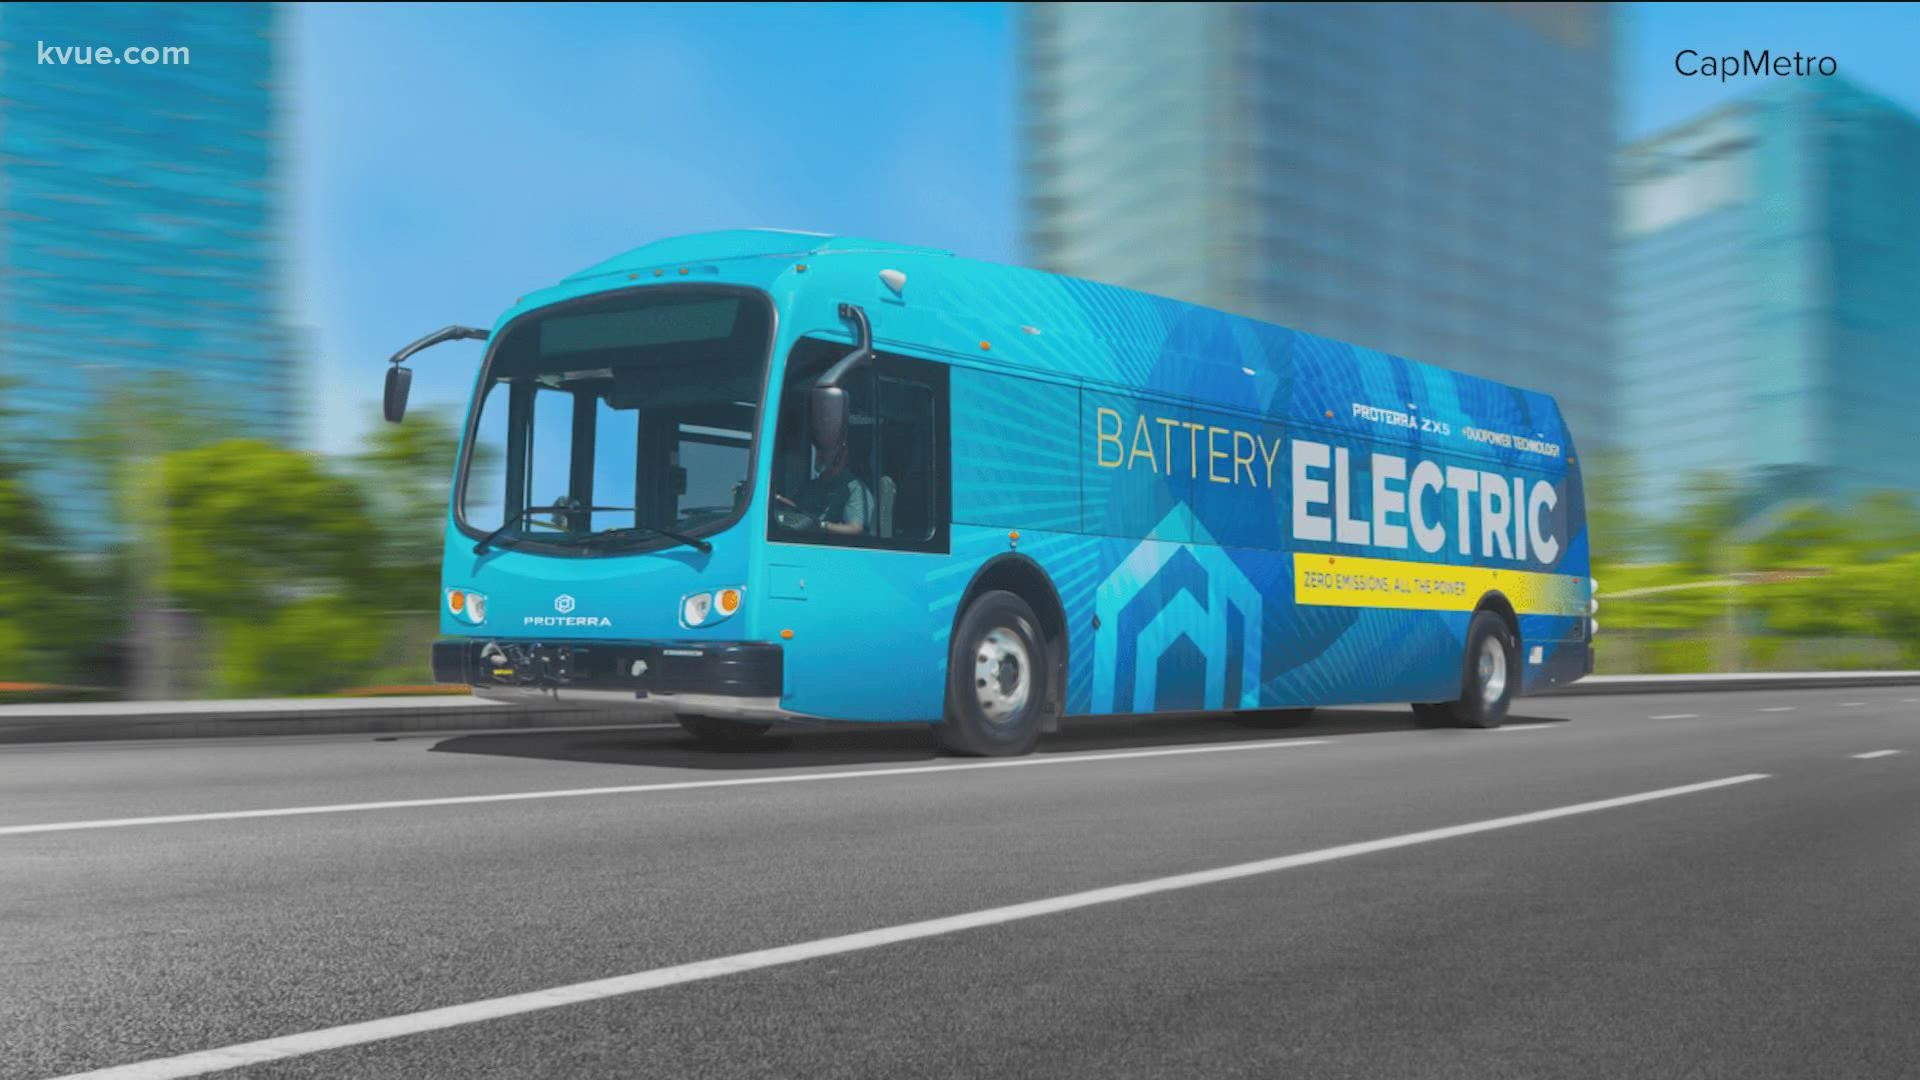 Capital Metro's board approved the purchase of 197 new electric buses. The move is a major step toward Project Connect's green energy goals.